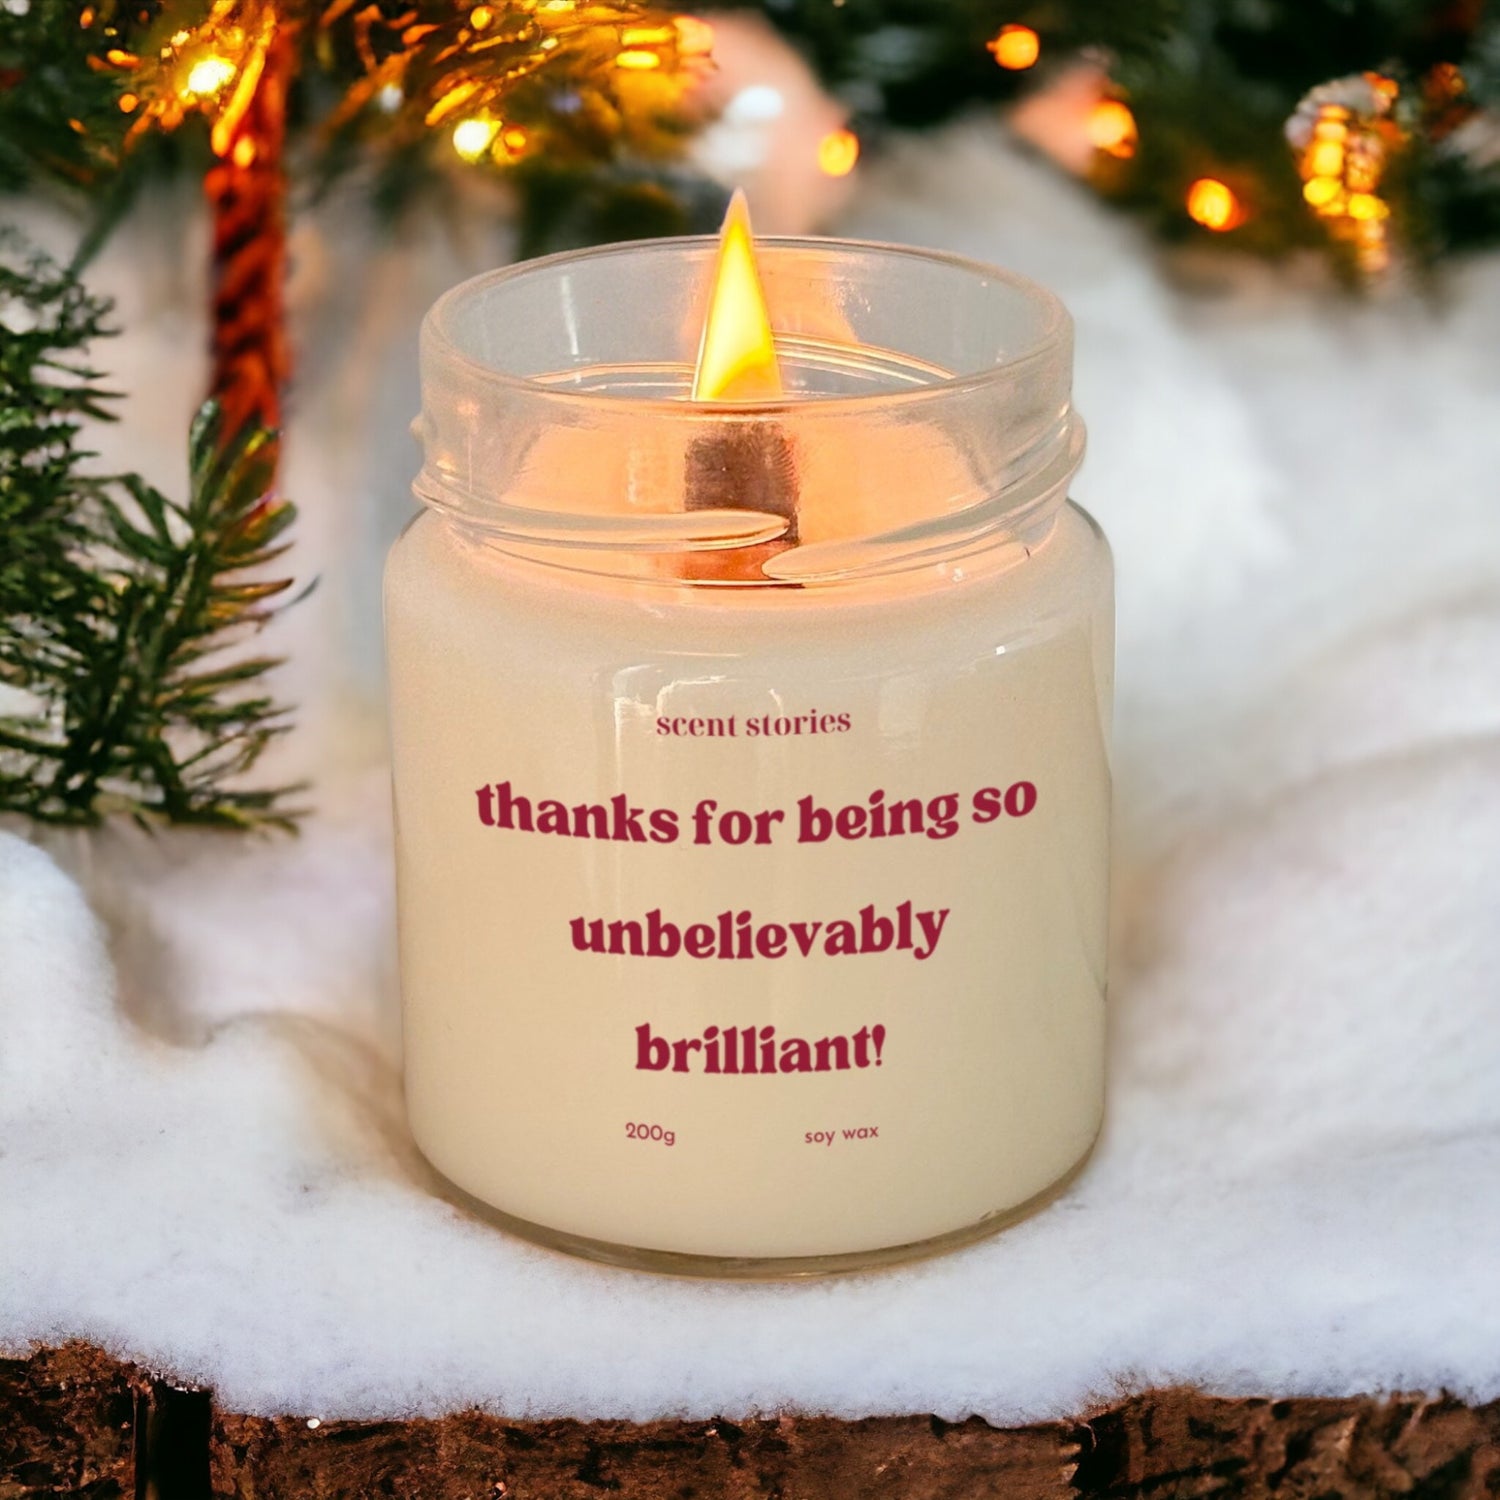 Thank you for being brilliant - Candle